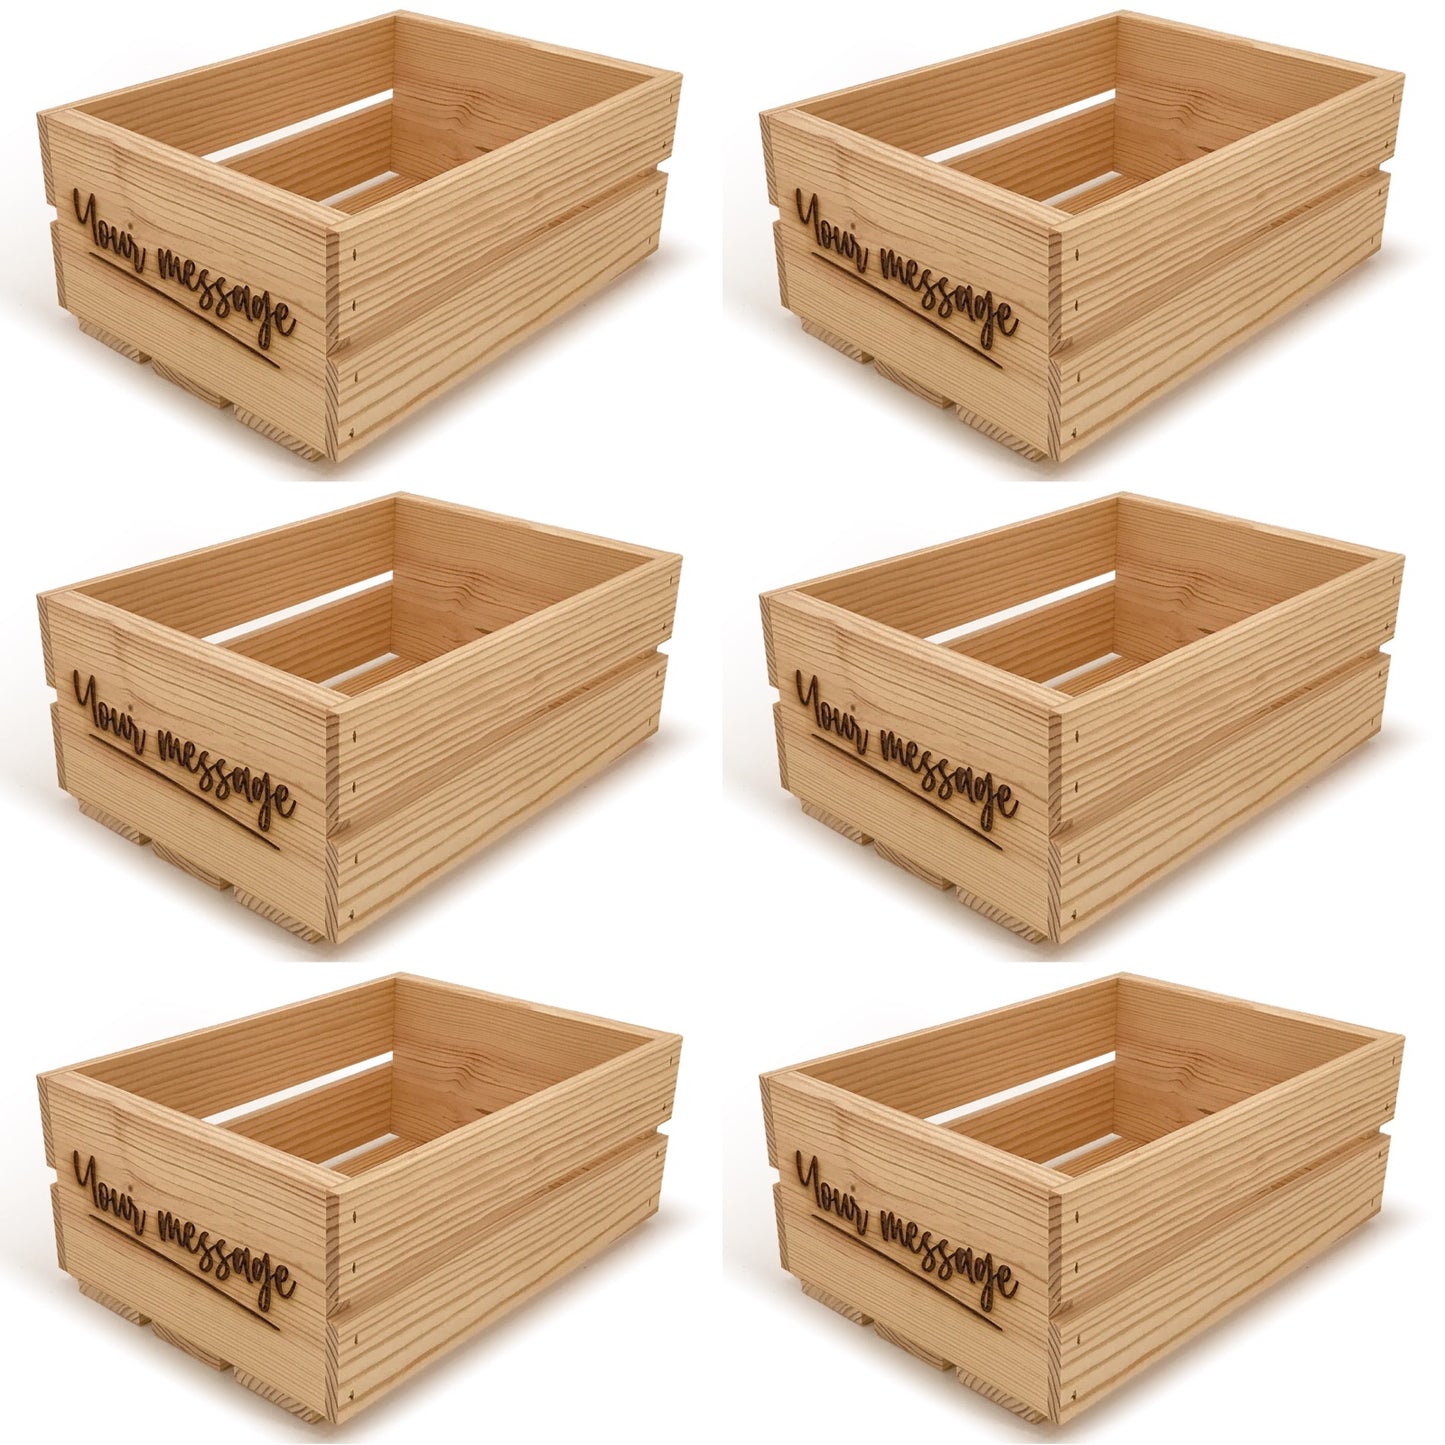 6 Small wooden crates with custom message 12x9x5.25, 6-WS-12-9-5.25-ST-NW-NL, 12-WS-12-9-5.25-ST-NW-NL, 24-WS-12-9-5.25-ST-NW-NL, 48-WS-12-9-5.25-ST-NW-NL, 96-WS-12-9-5.25-ST-NW-NL